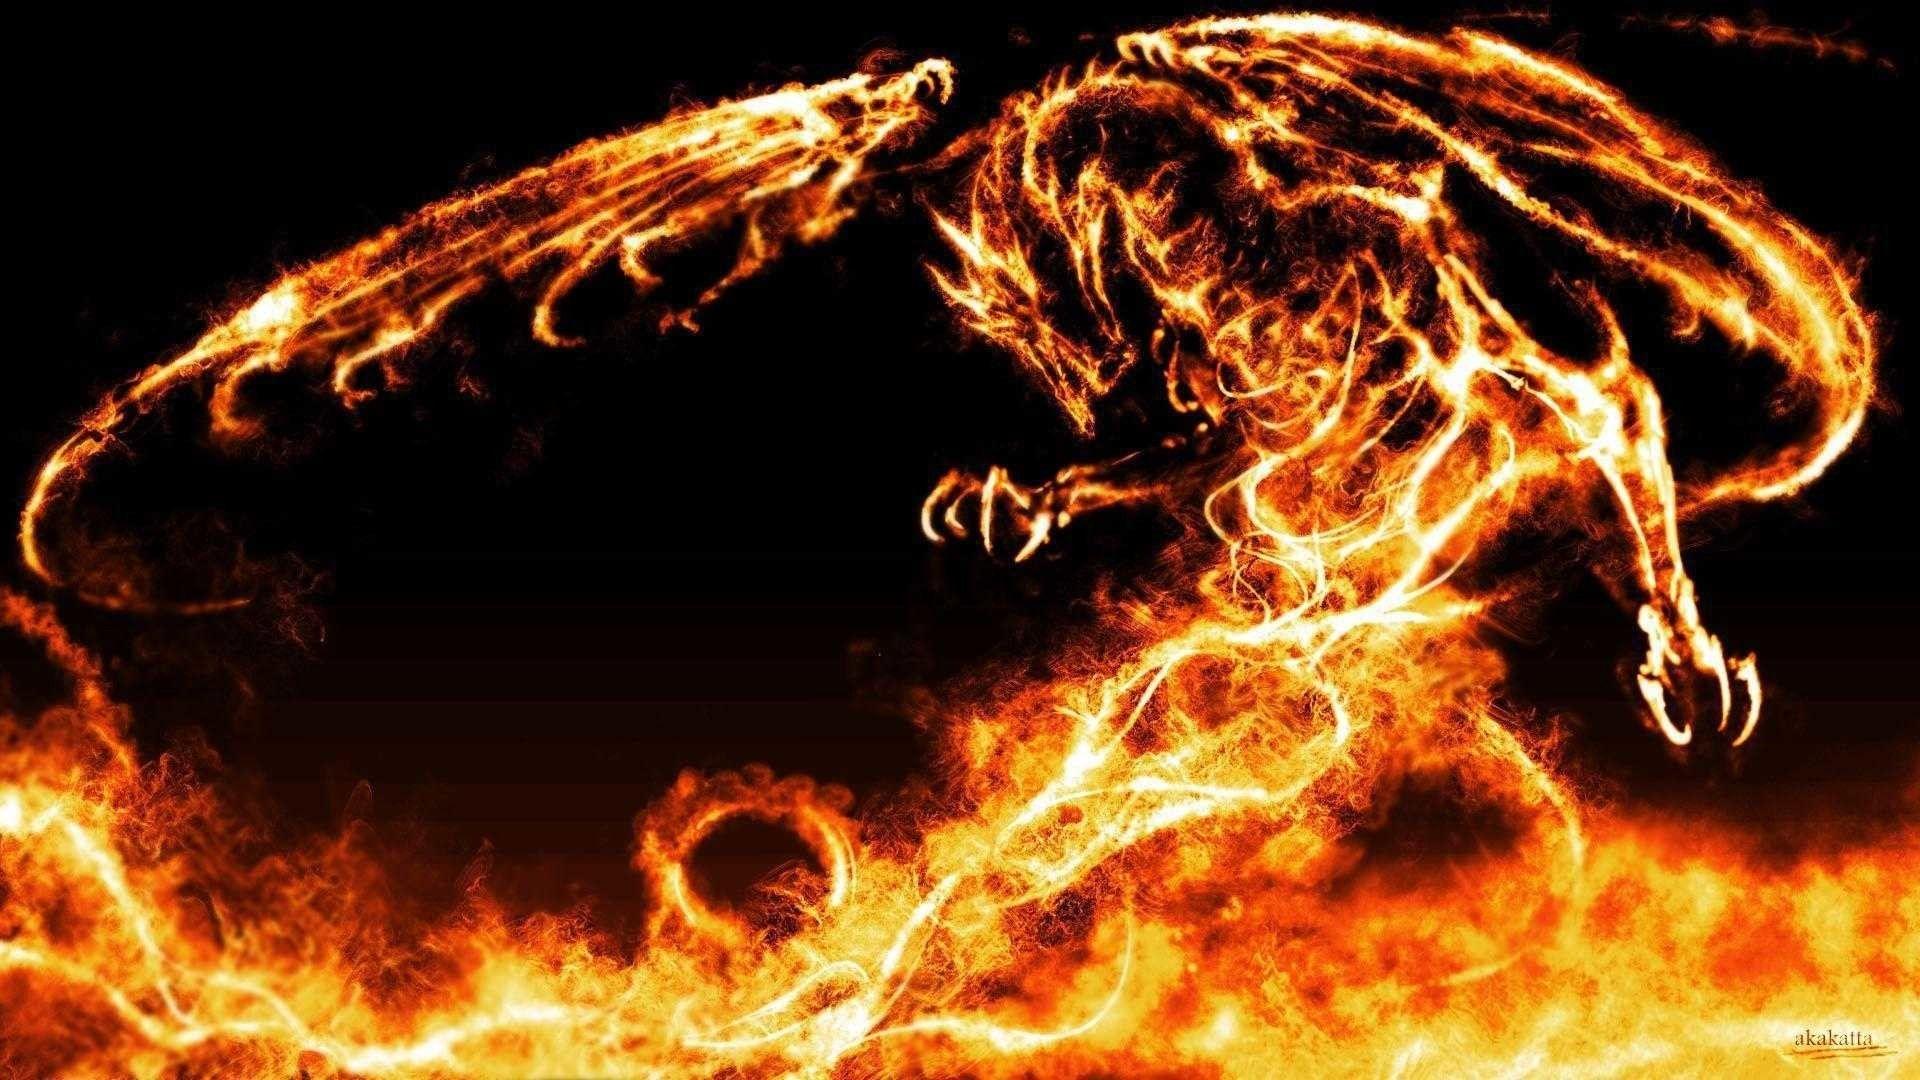 Cool Fire Backgrounds 66 images